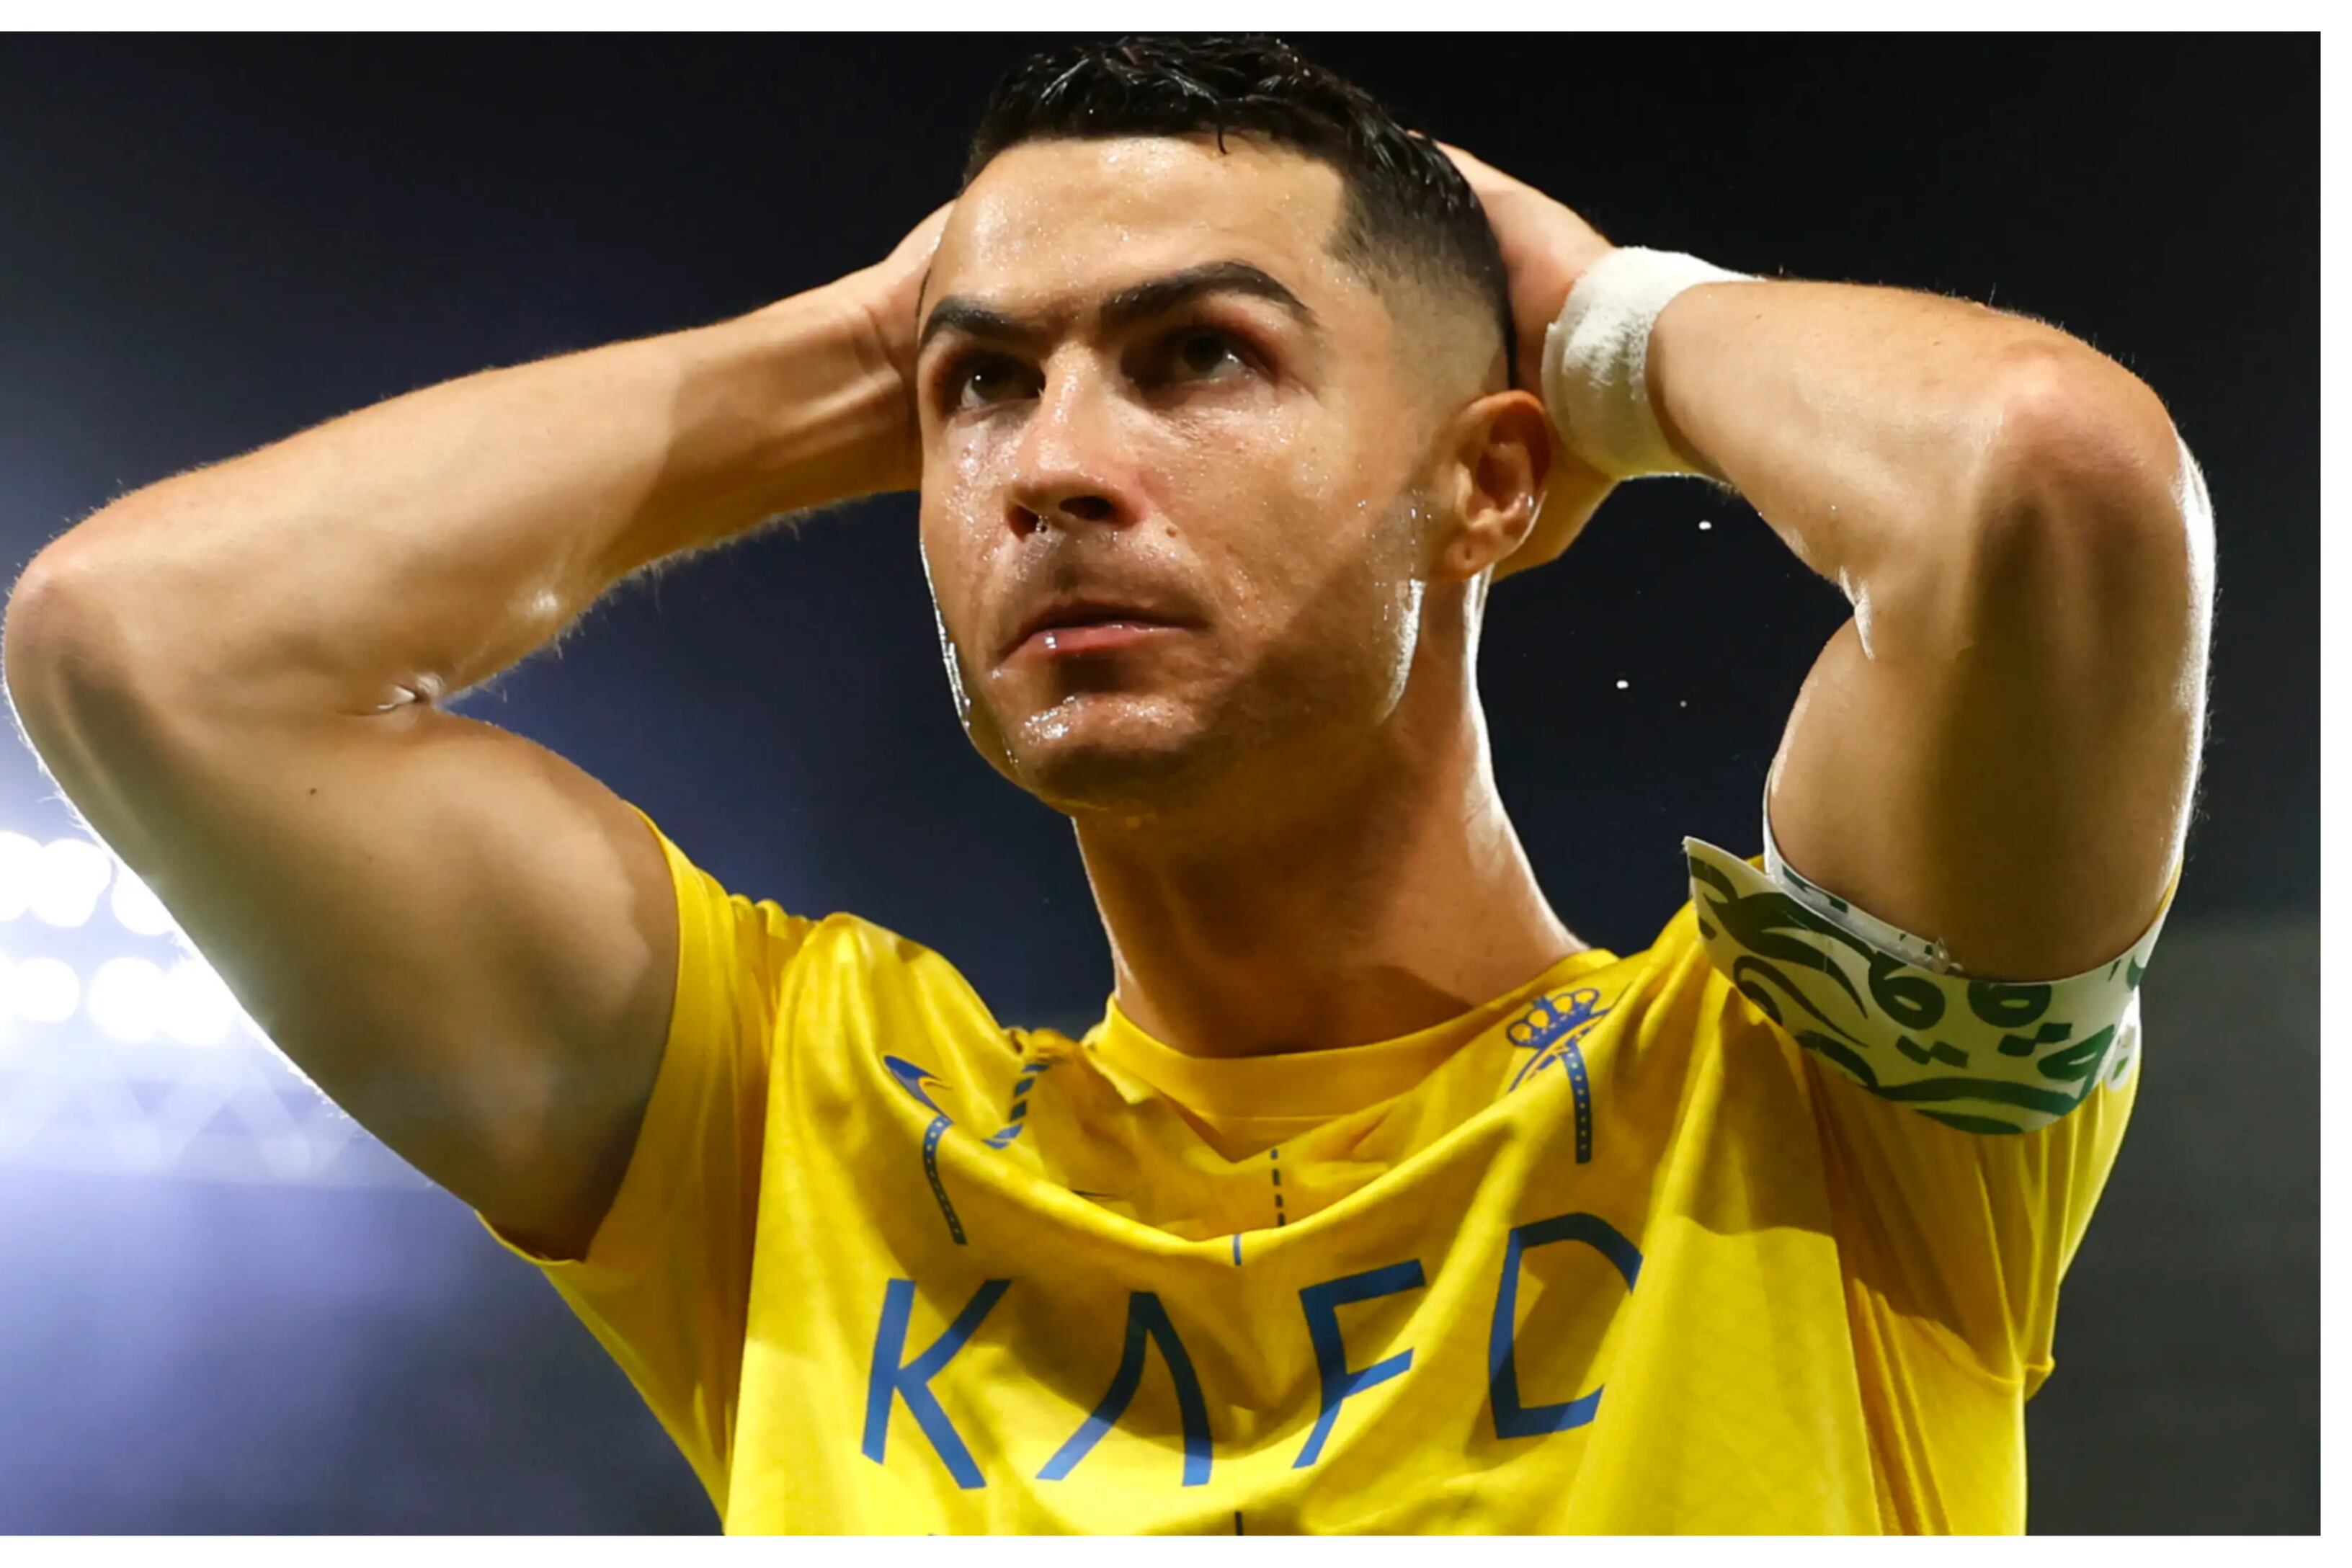 Cristiano Ronaldo wanted him out of Al Nassr, now he wants to win Liga MX again